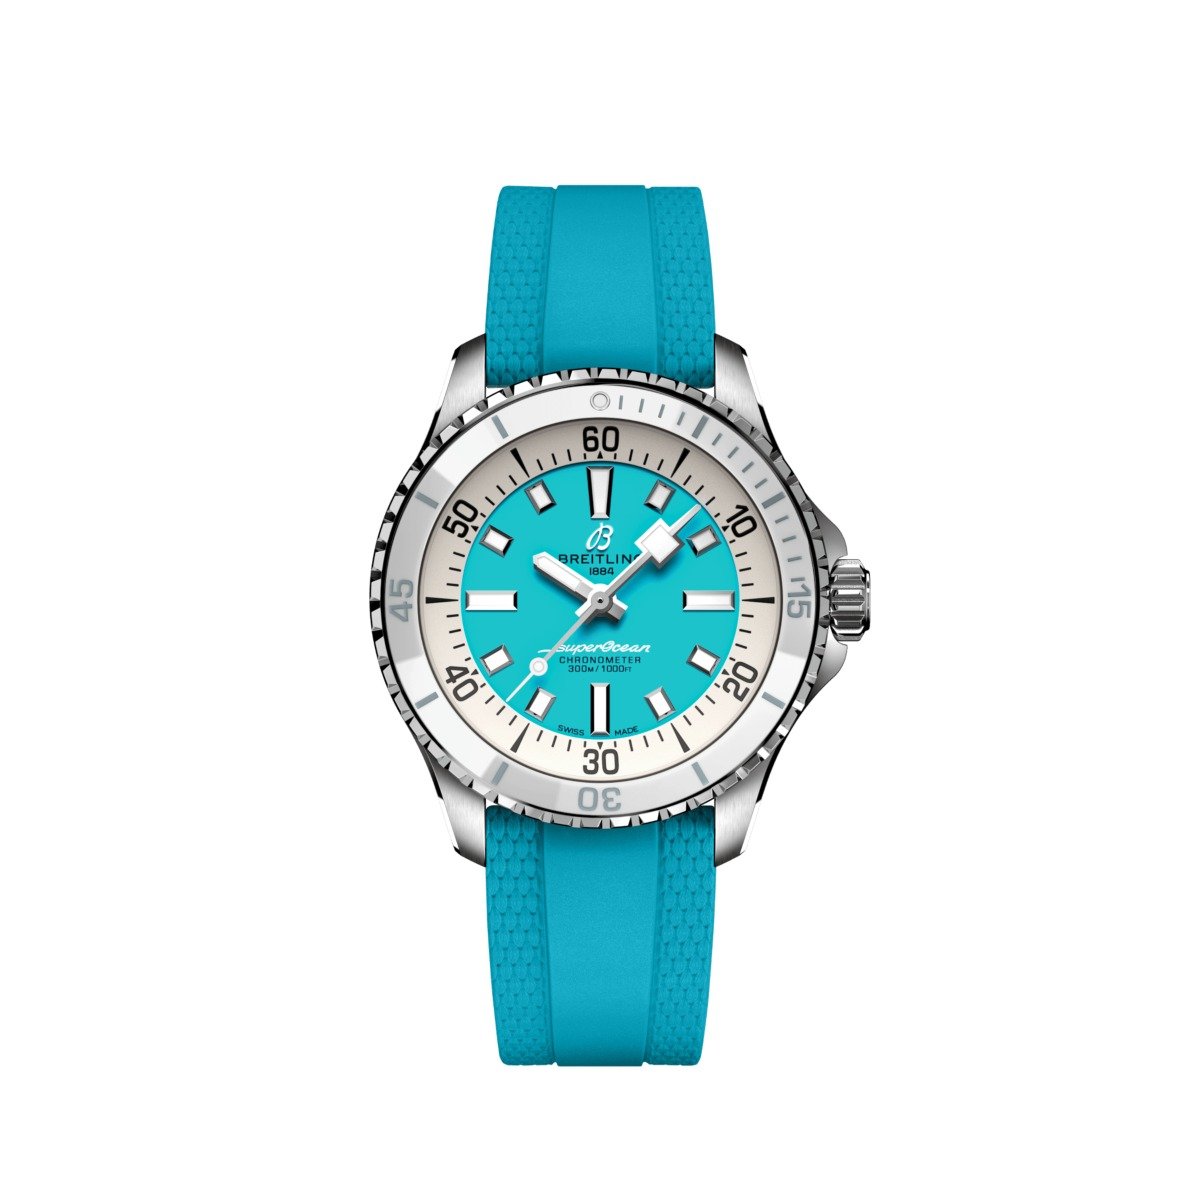 Breitling Superocean Automatic 36 mm turkis skive